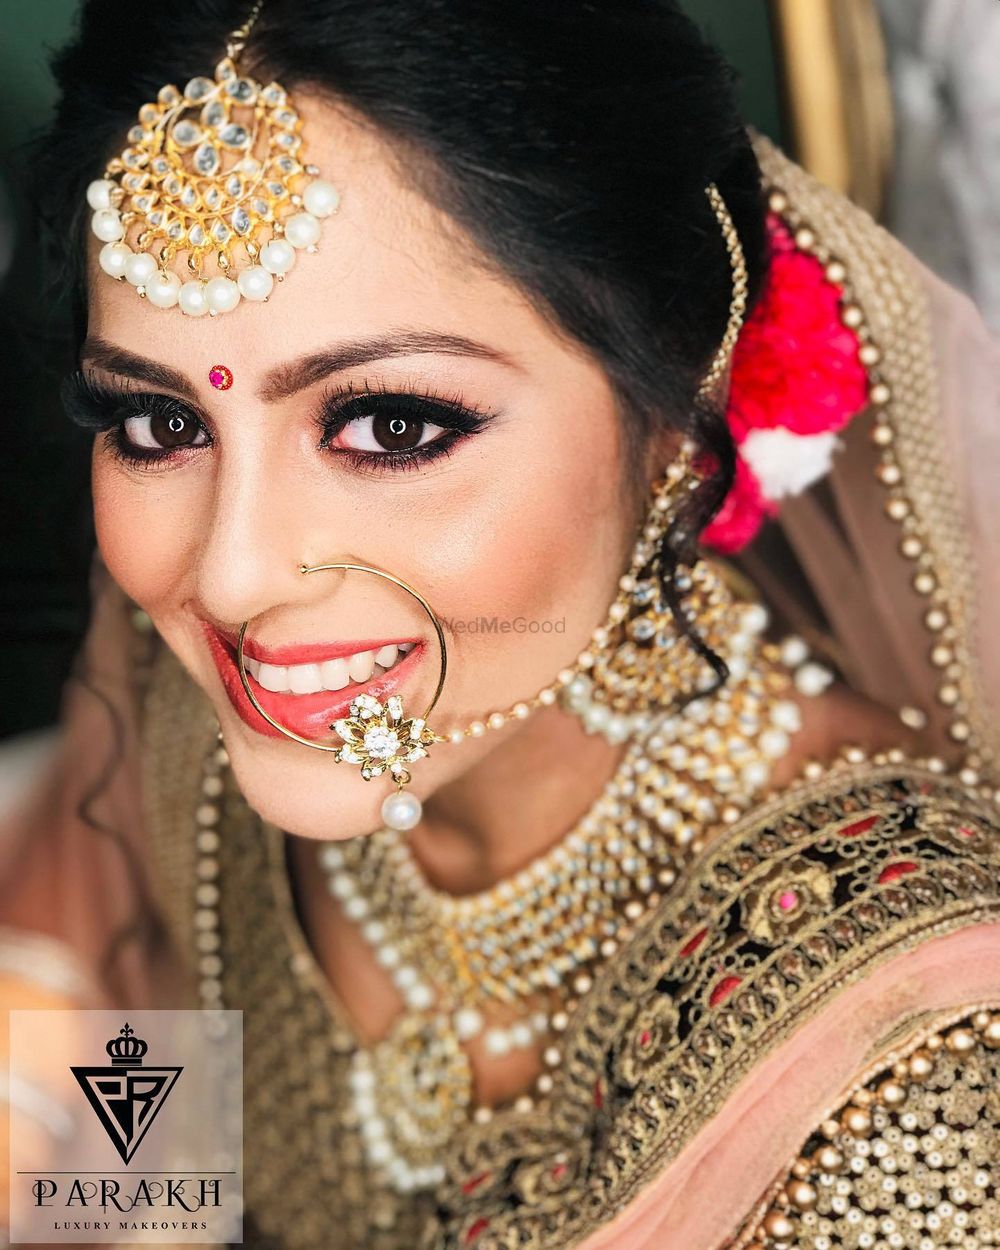 Photo From BRIDAL - By Parakh Luxury Makeovers